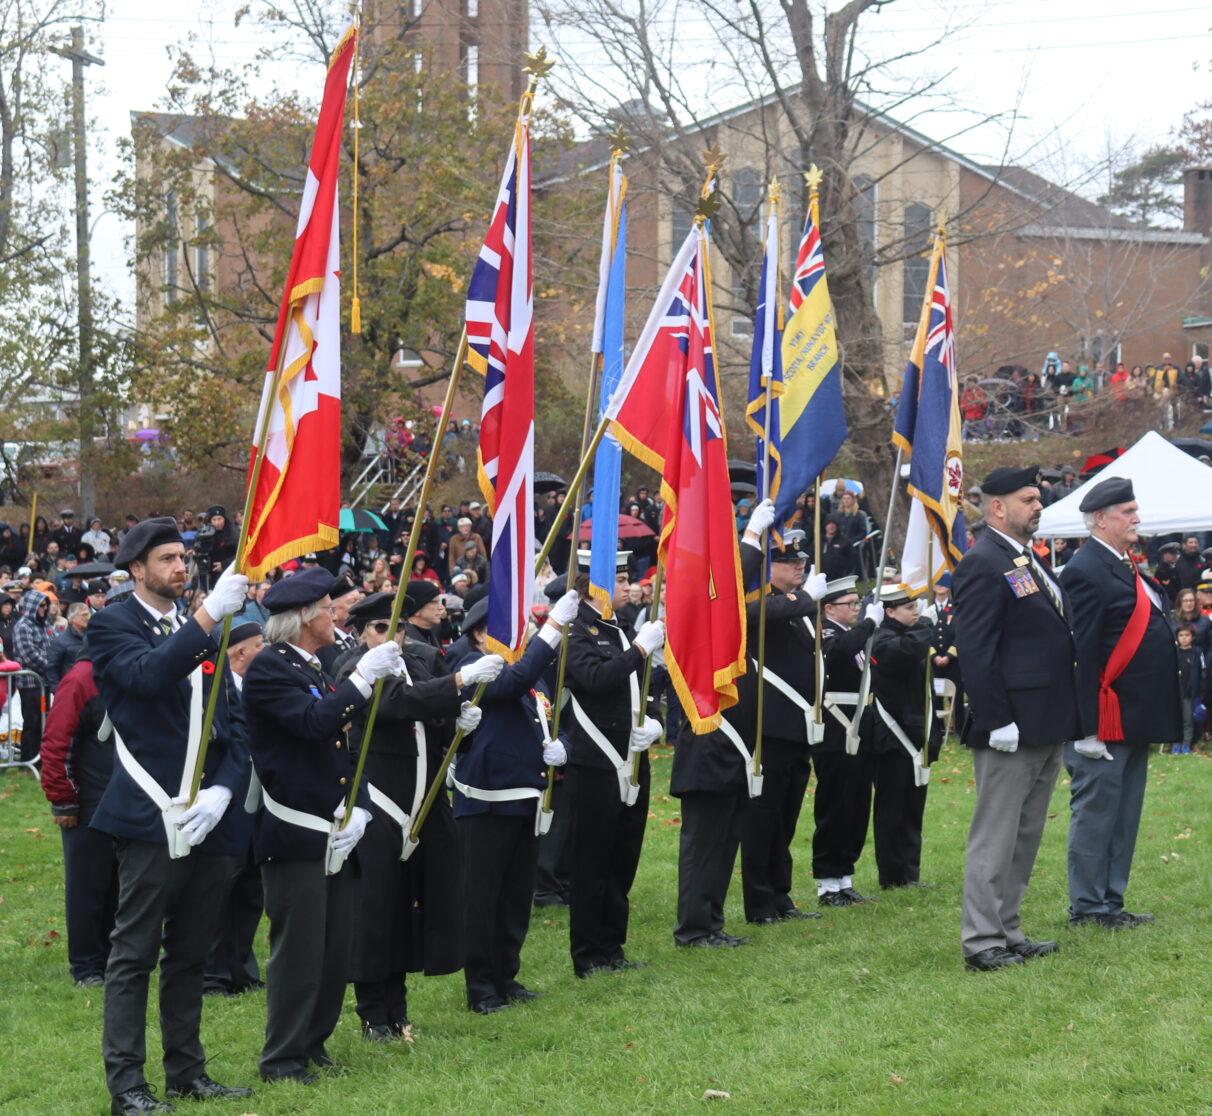 The flag bearers stand holding their respective flags.